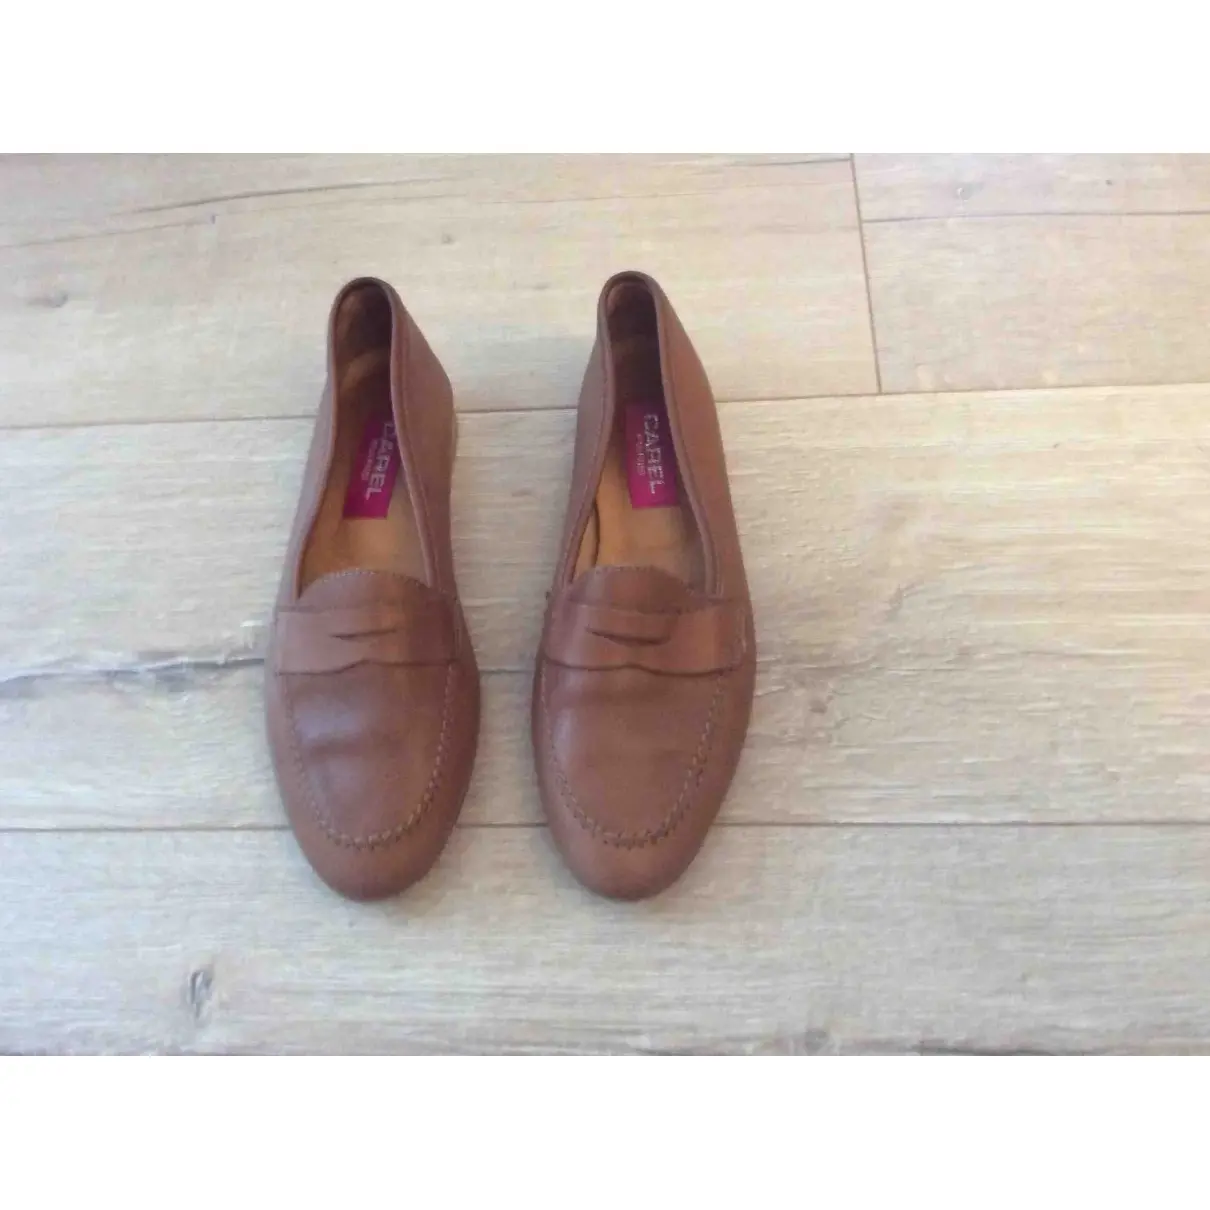 Carel Leather flats for sale